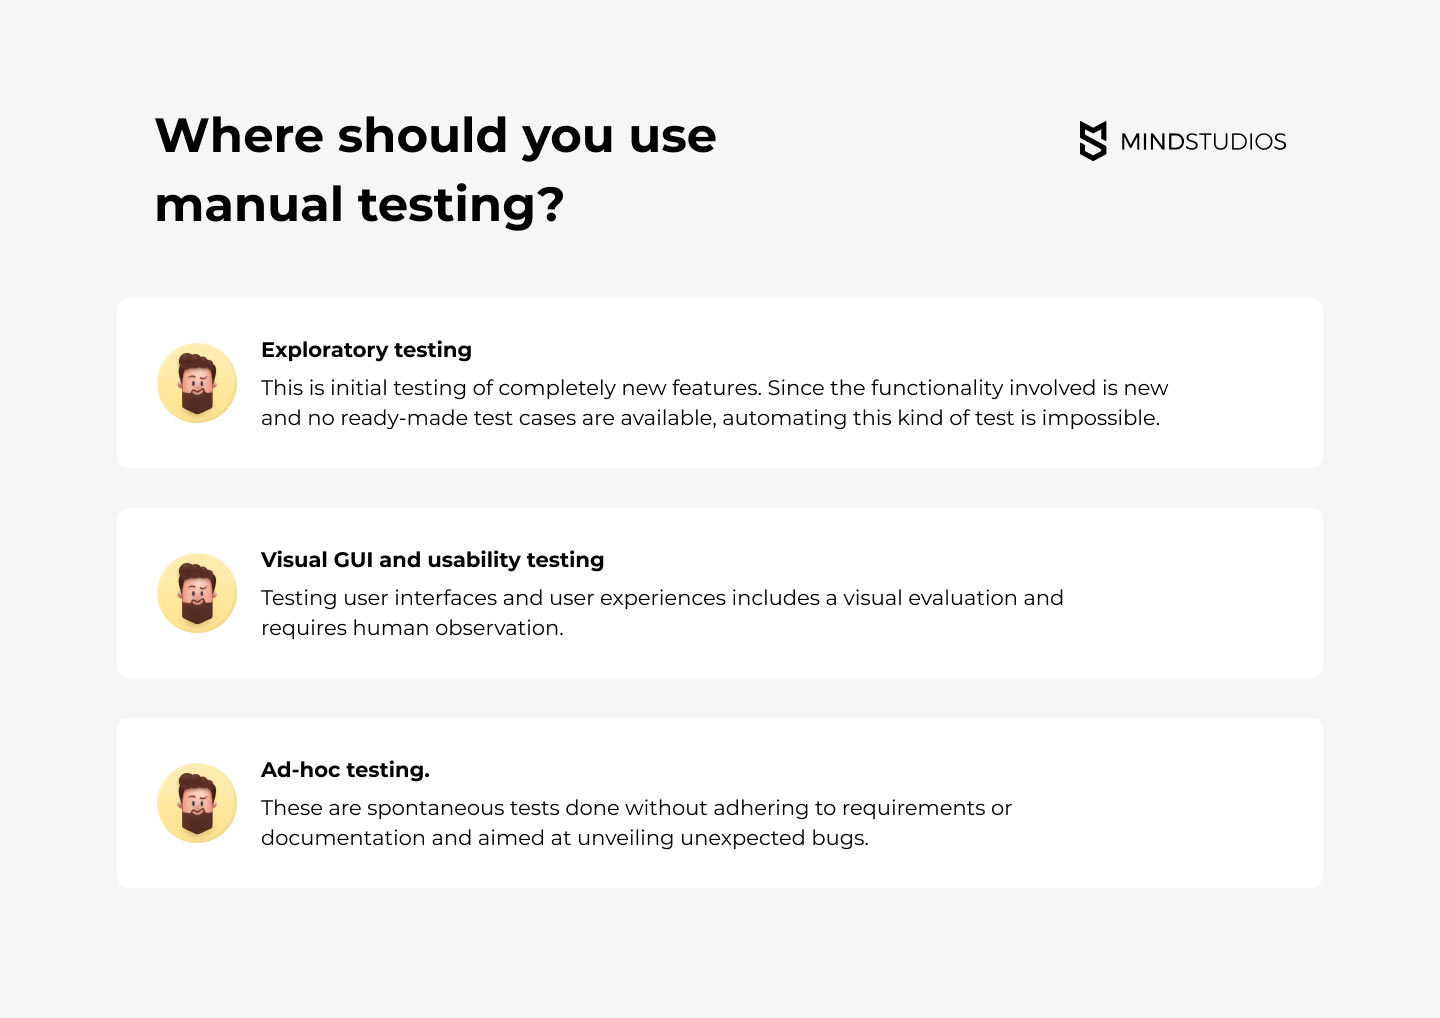 when to use manual testing